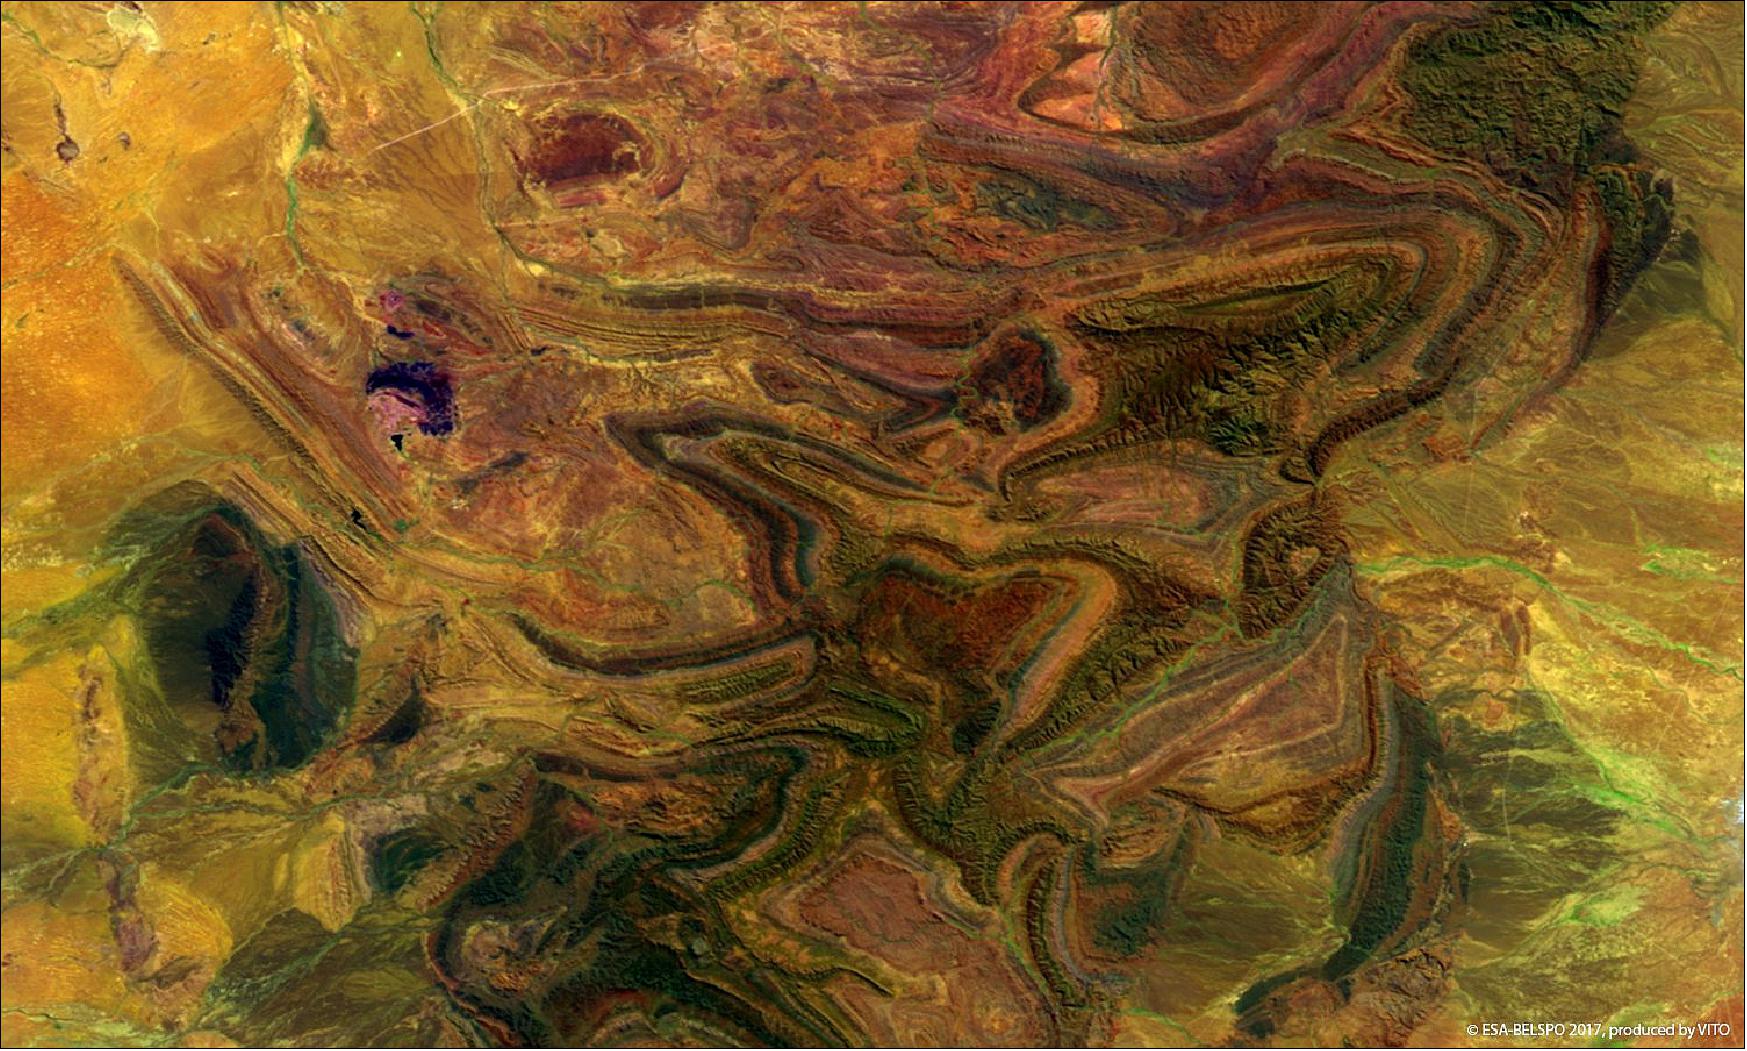 Figure 43: PROBA-V false-color image of Flinders Range, Australia, showing the northern part of the rugged, weathered peaks and rocky gorges of the Flinders Ranges, the largest mountain range in the South Australian Outback (image credit: ESA-BELSPO 2017, produced by VITO)